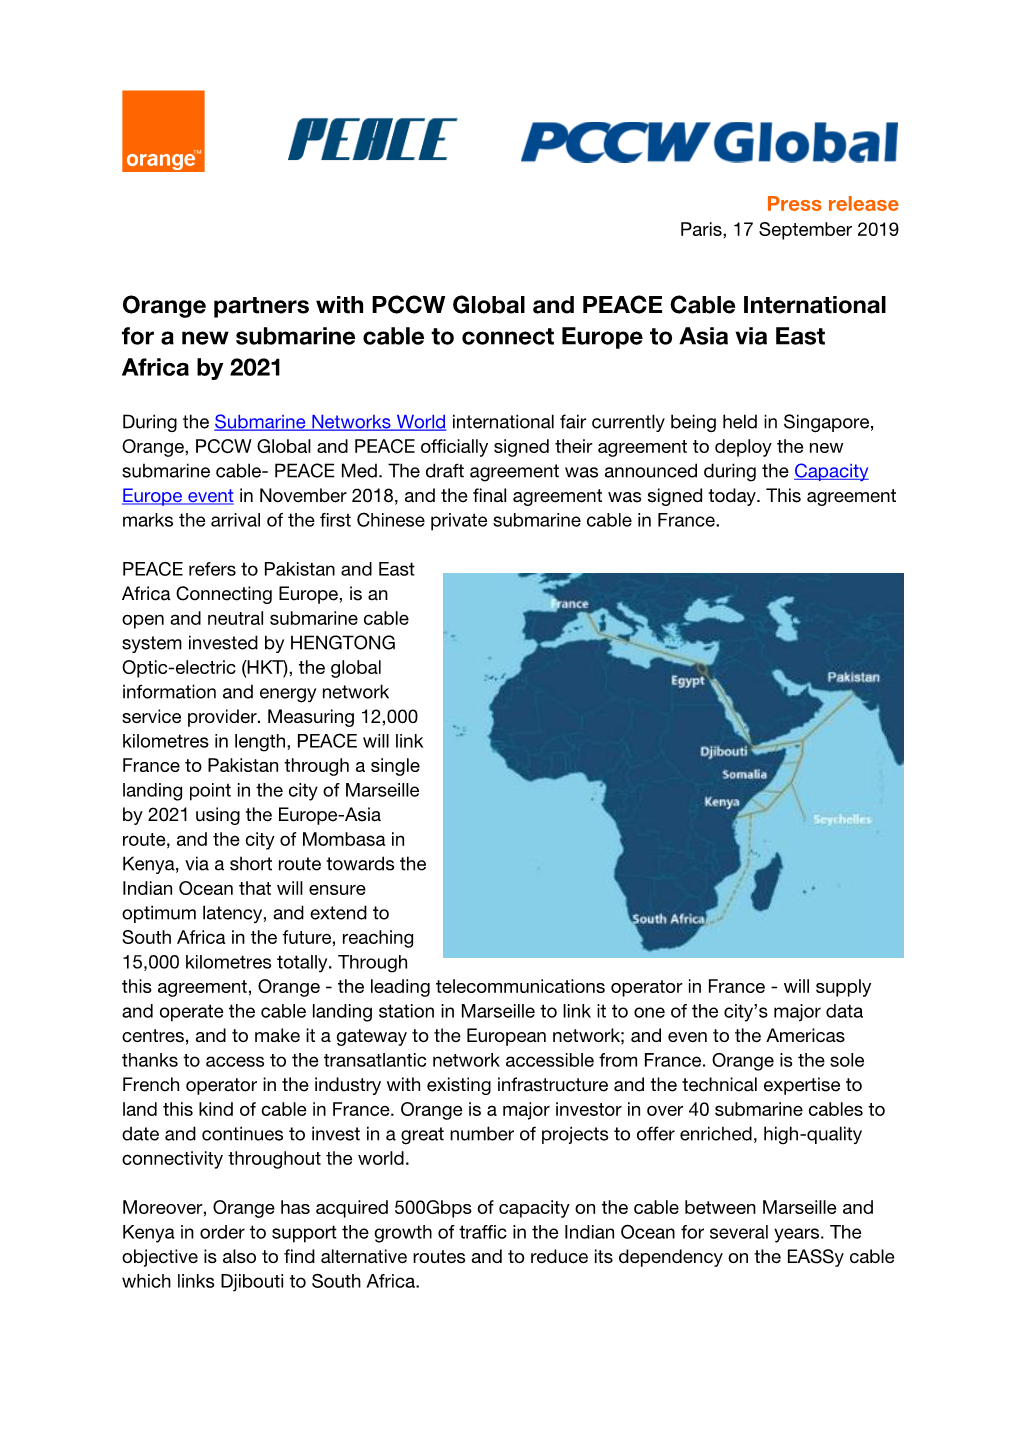 Orange Partners with PCCW Global and PEACE Cable International for a New Submarine Cable to Connect Europe to Asia Via East Africa by 2021